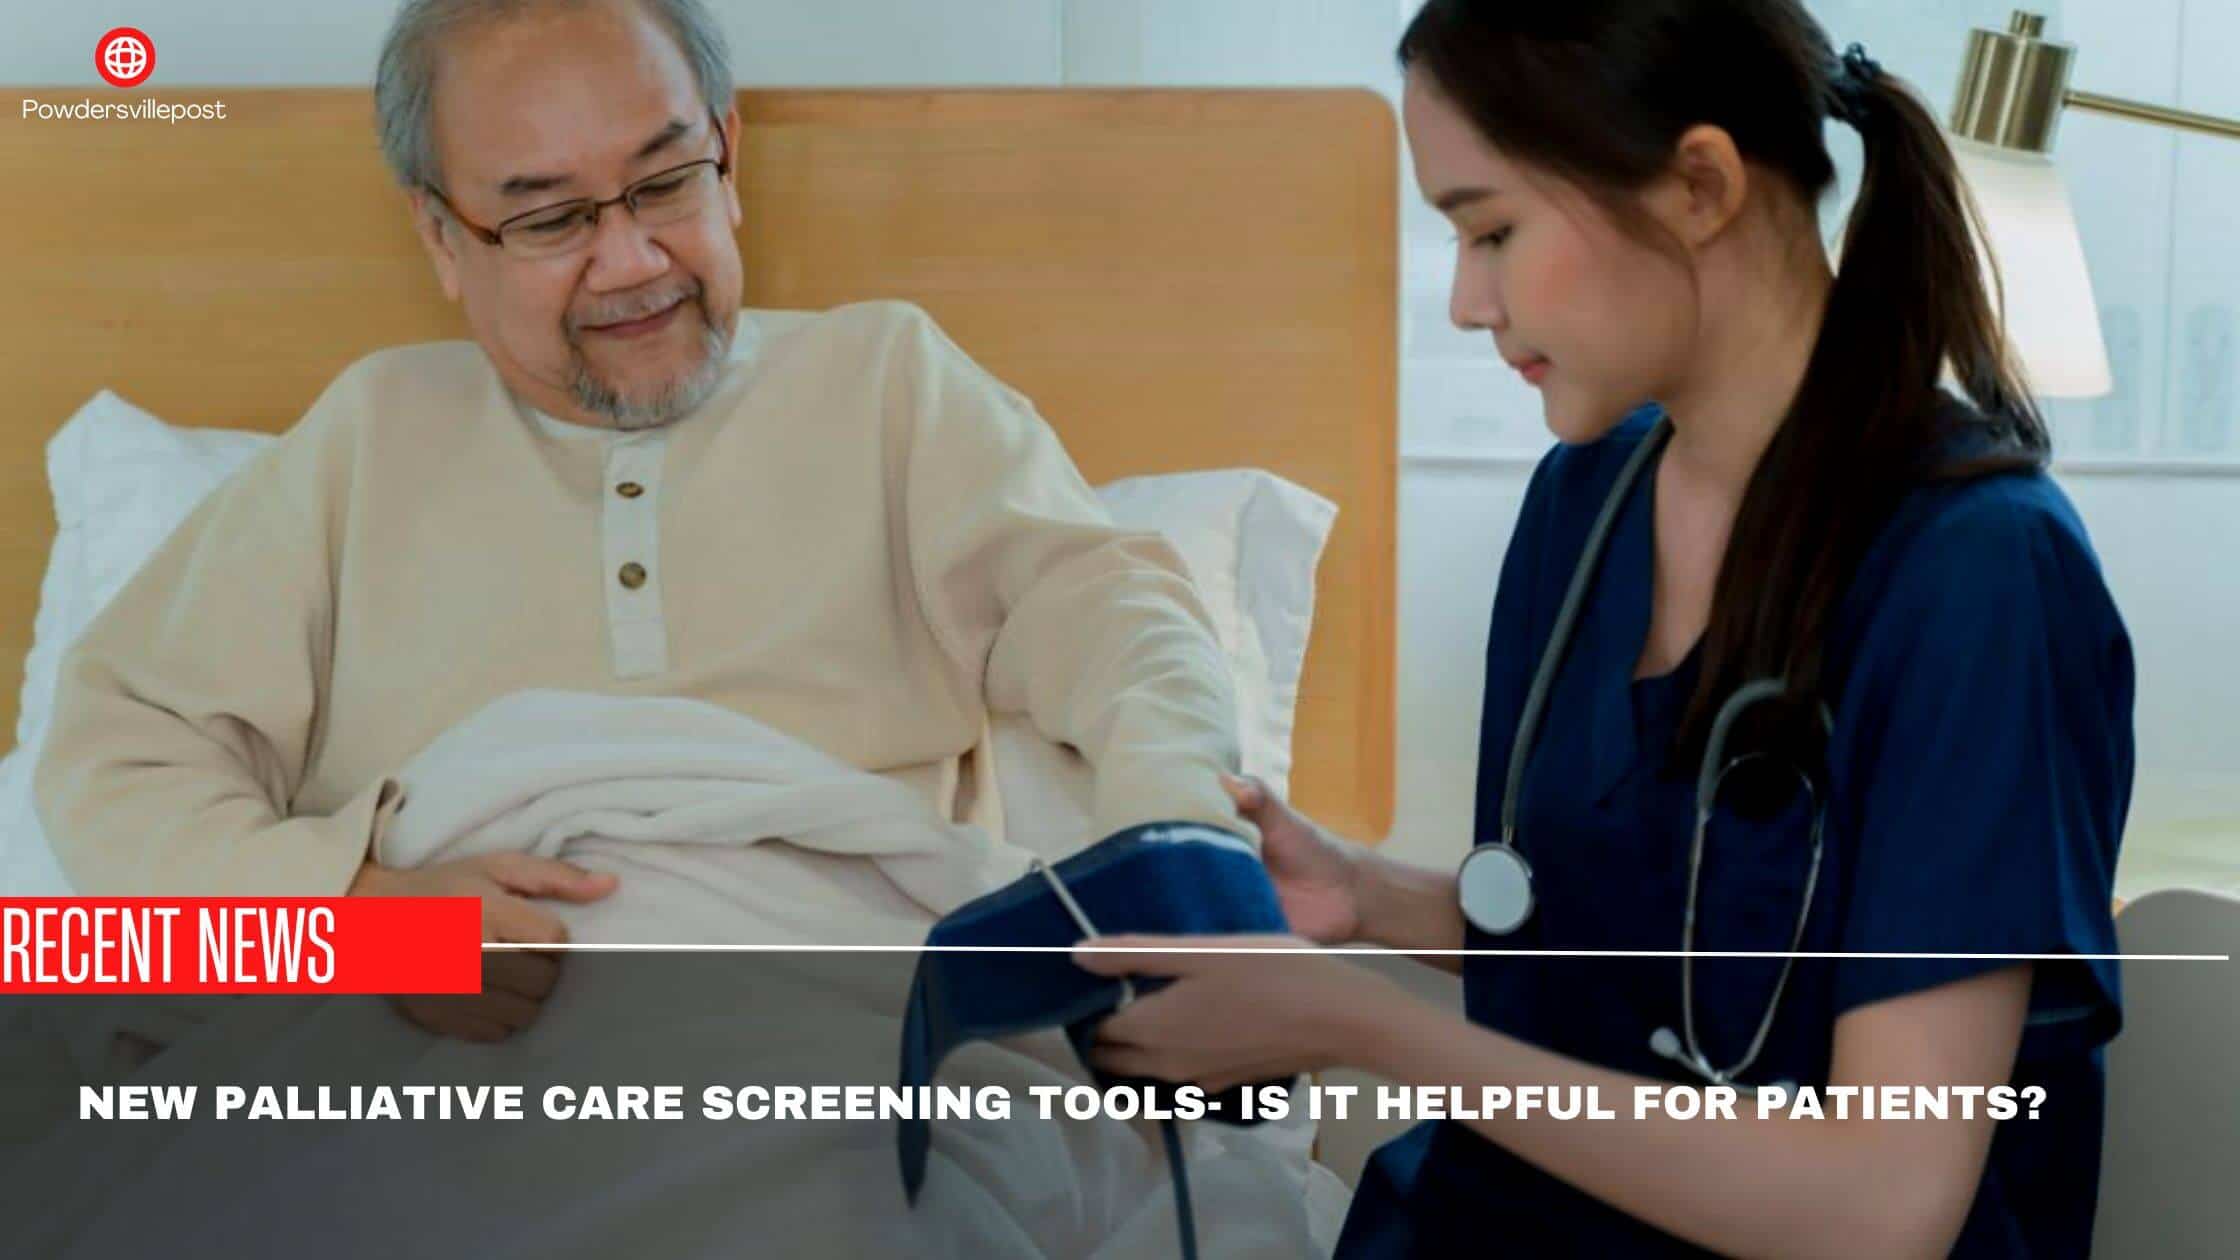 New Palliative Care Screening Tools- Is It Helpful For Patients